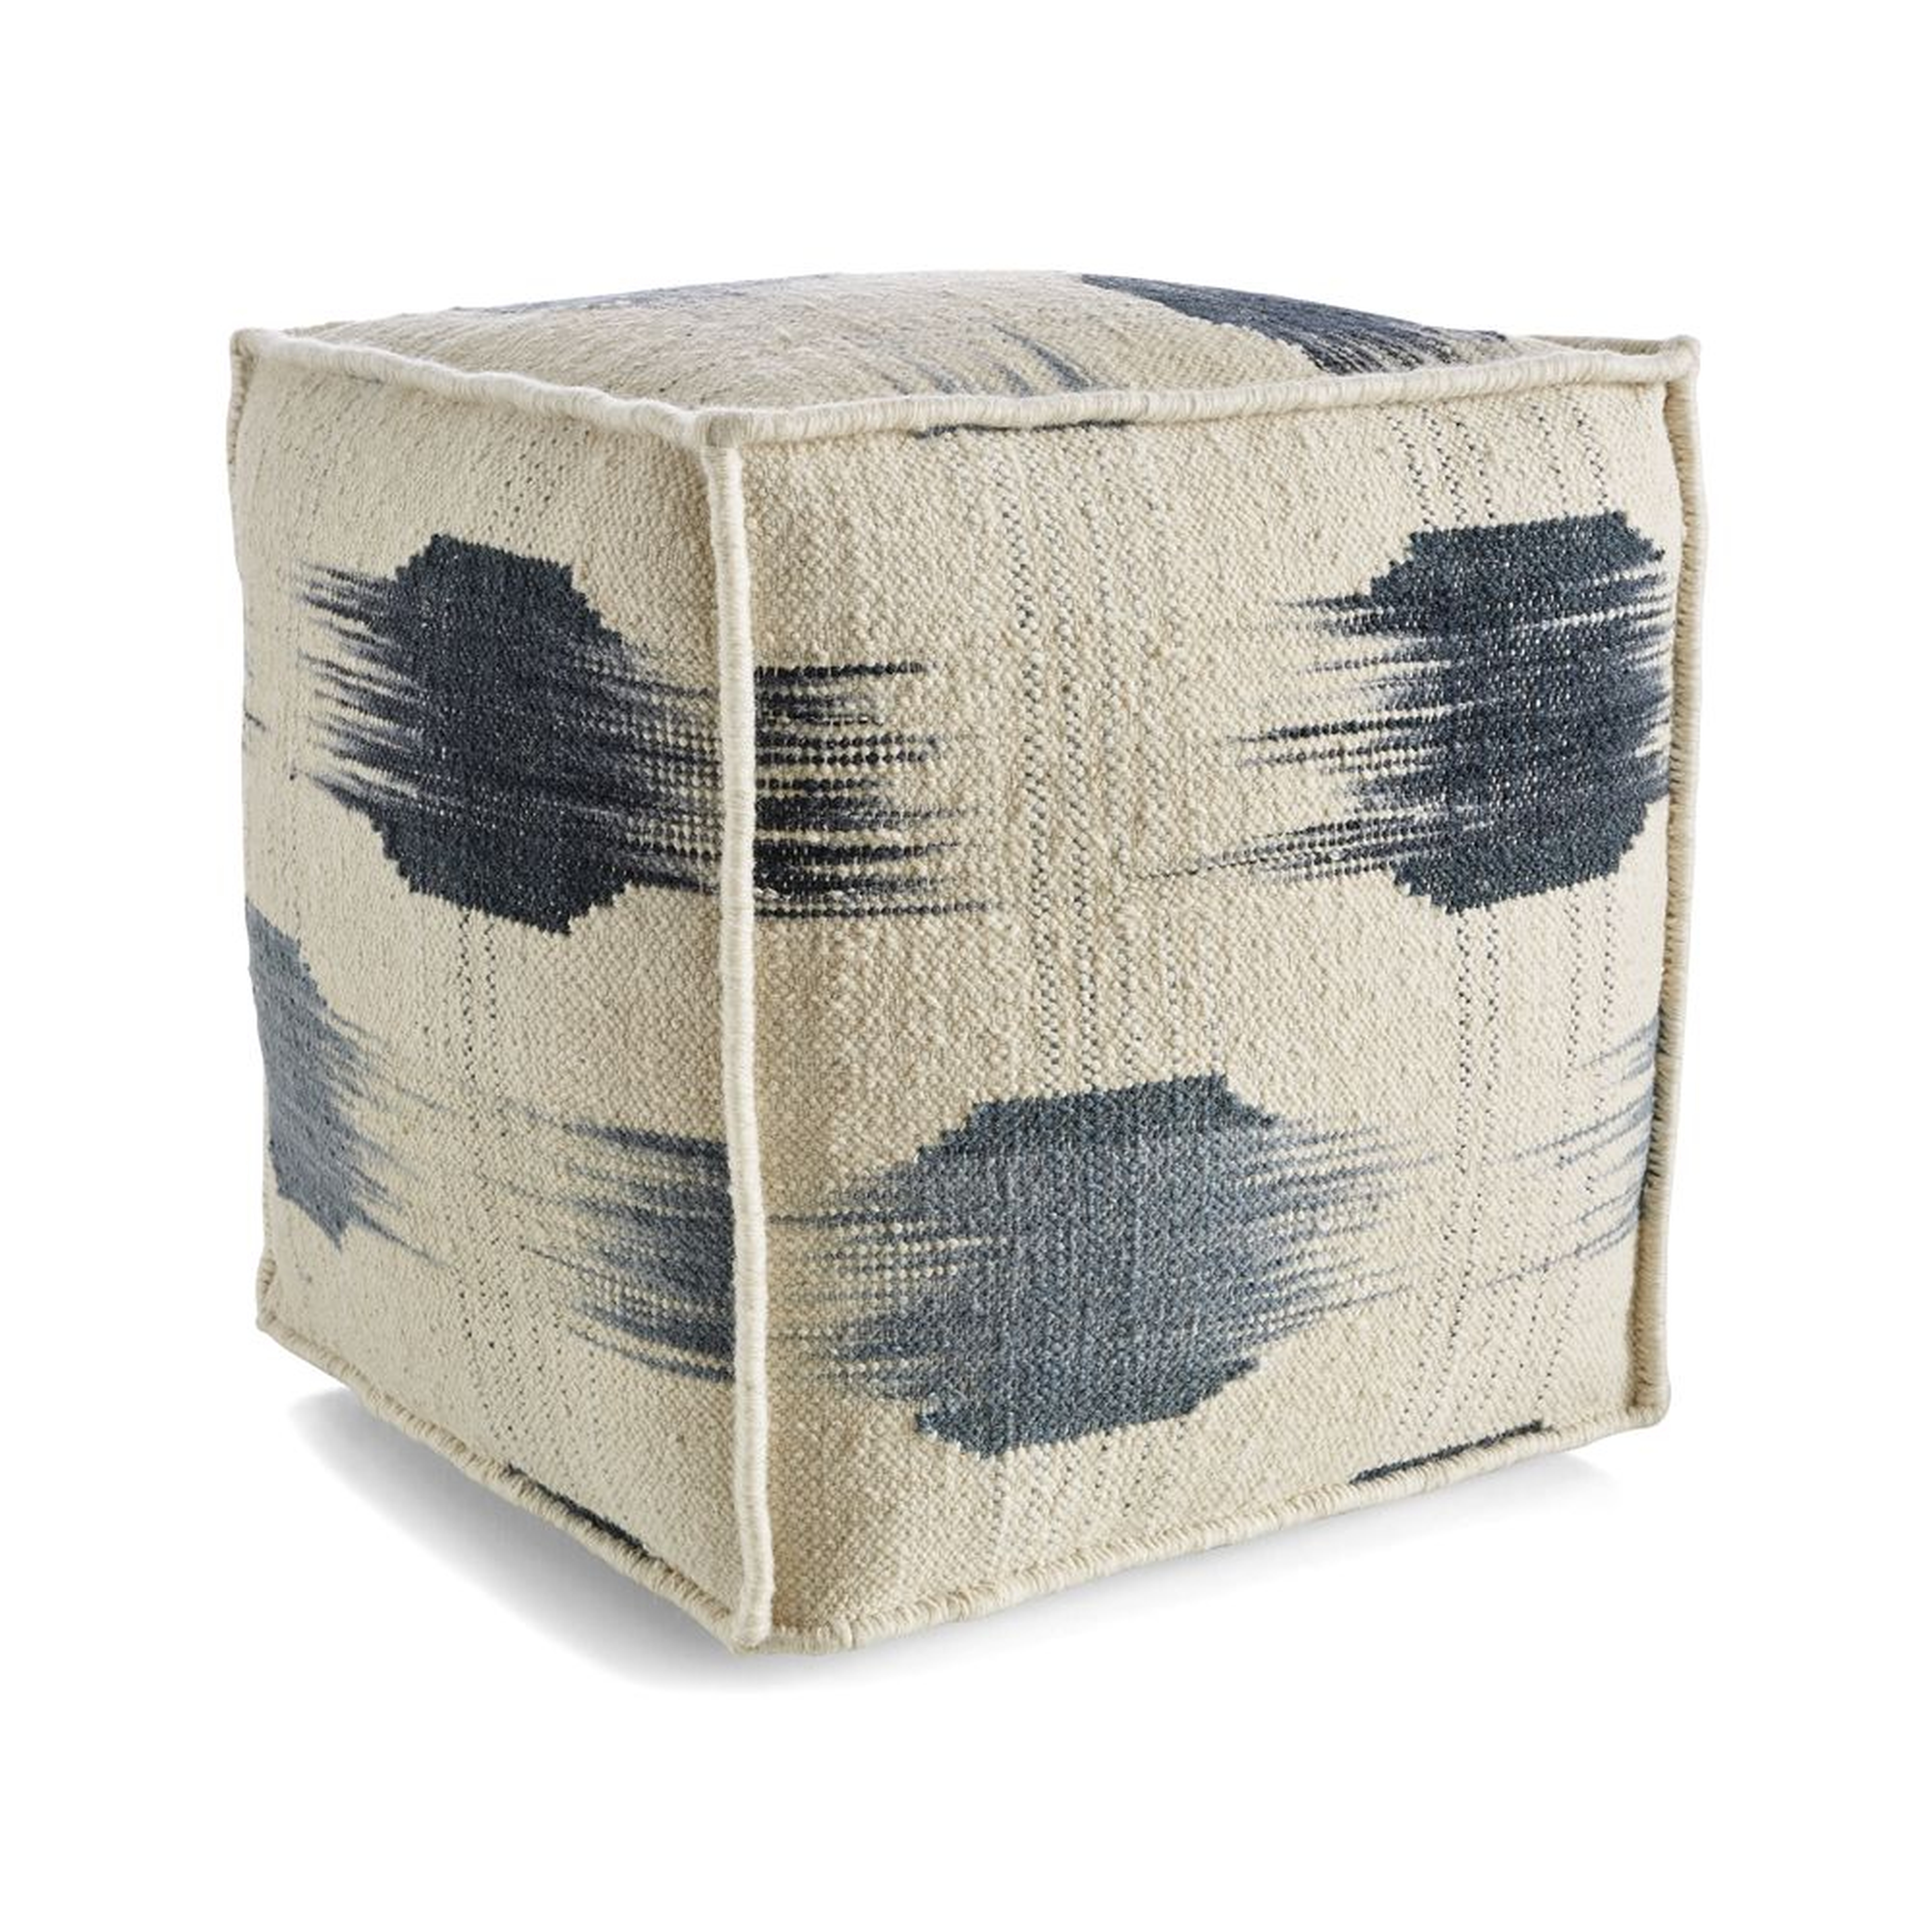 Shiomi 18"x18" Pouf - Crate and Barrel